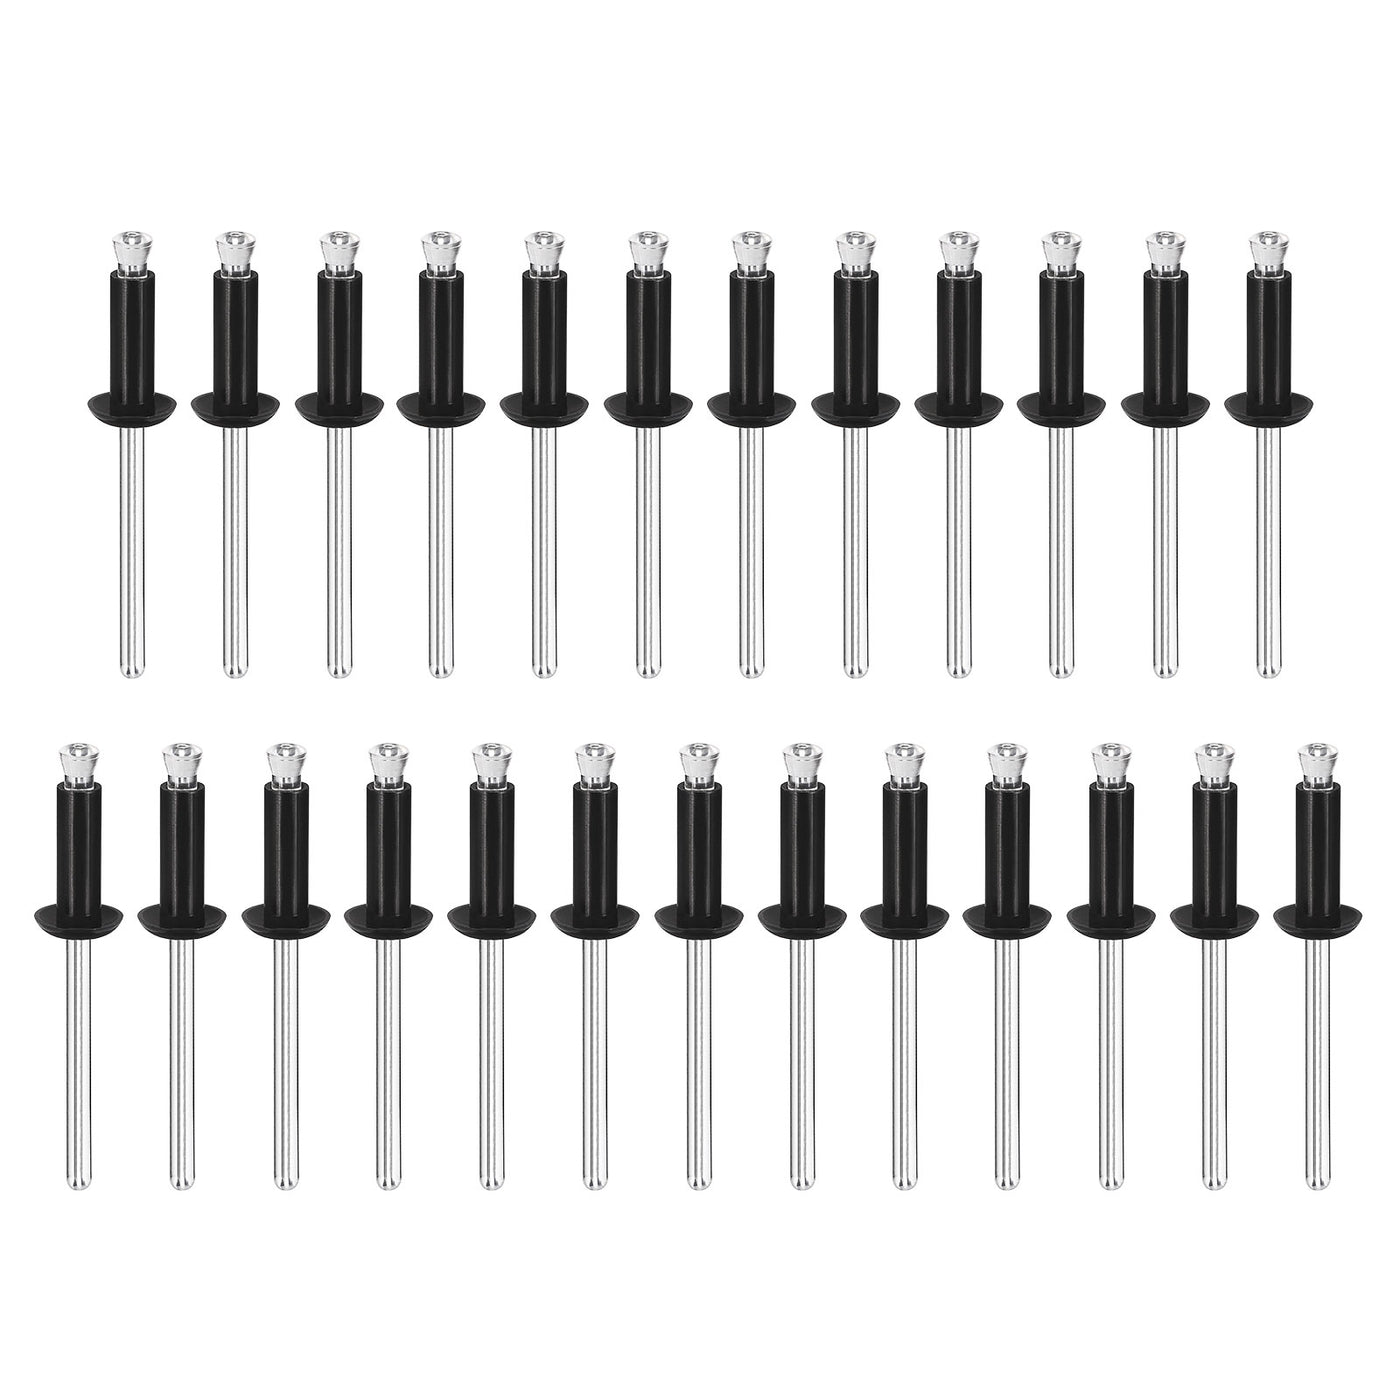 uxcell Uxcell 4.8mm x 14.4mm Nylon Blind Rivets for PC Board Bumper Trim Retainer, Black 50Pcs